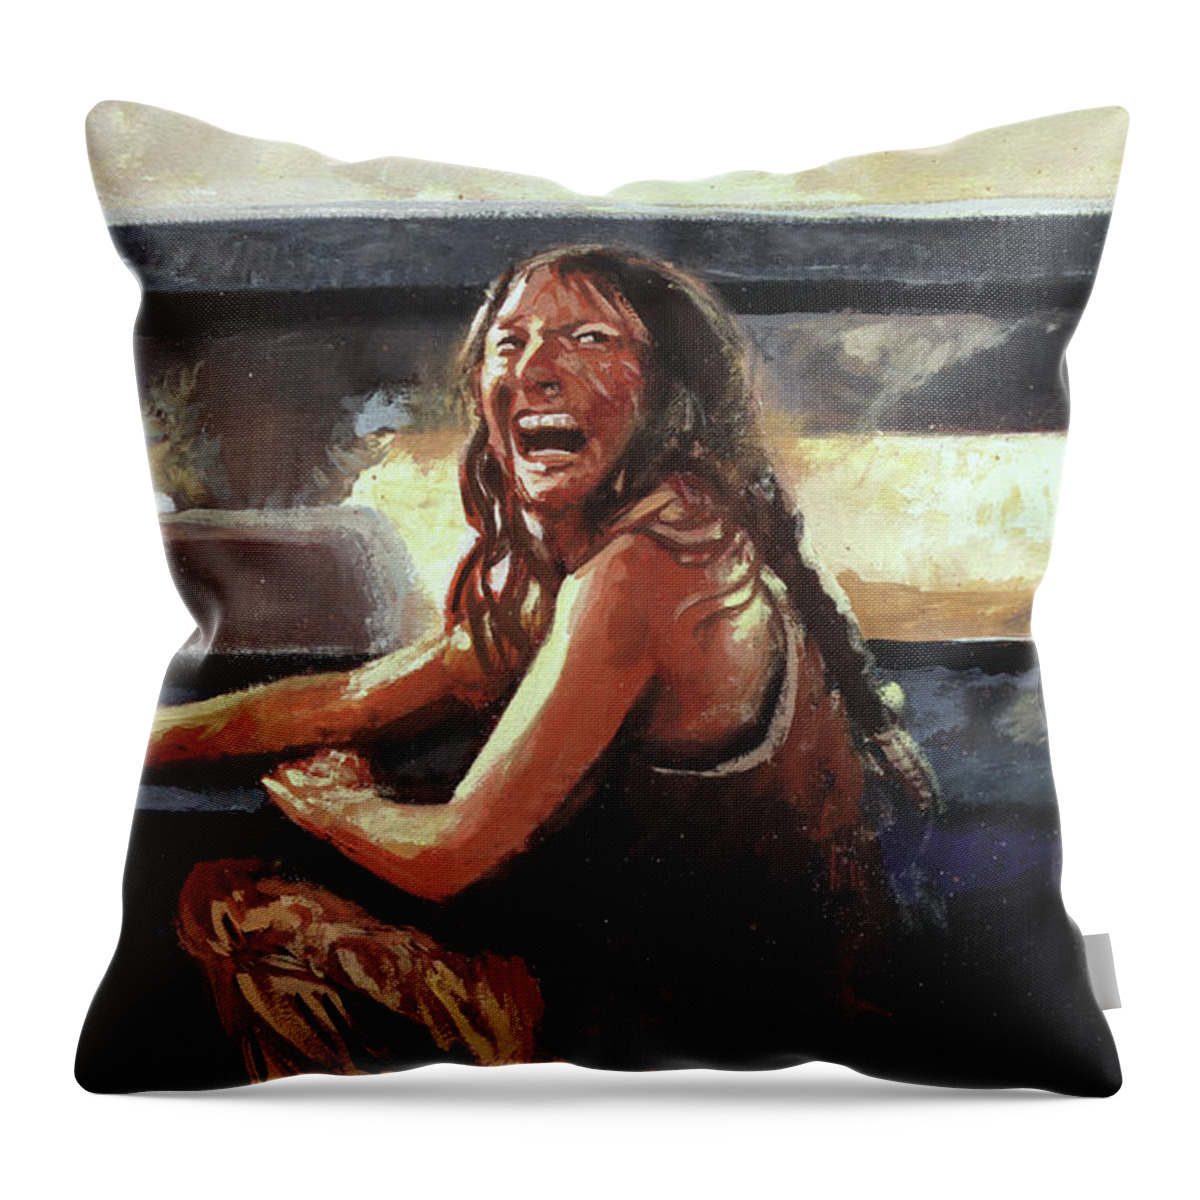 Girl Throw Pillow featuring the painting Final Girl Texas Chainsaw Massacre by Sv Bell